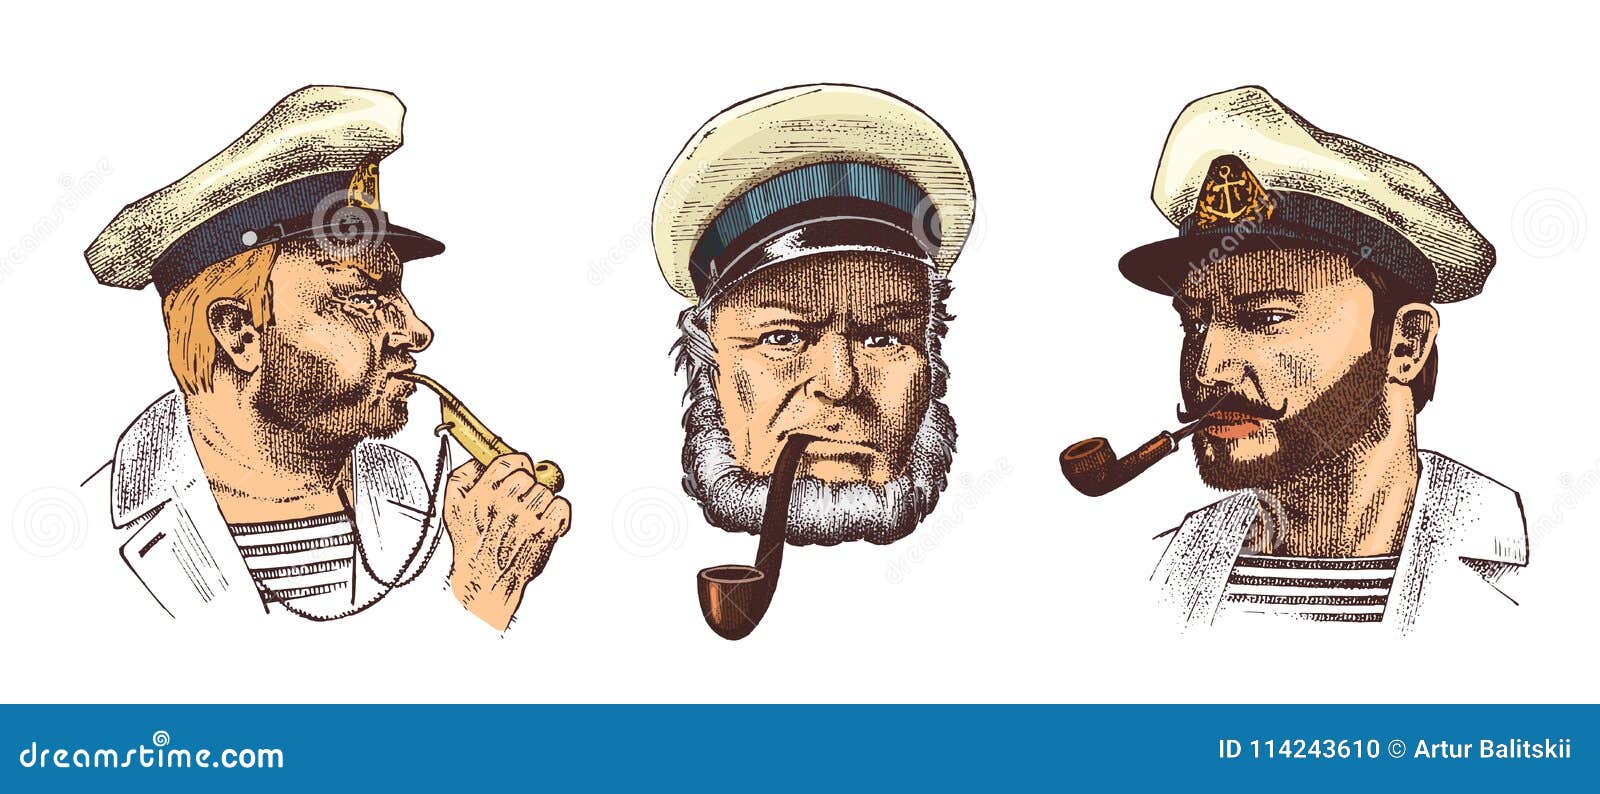 boatswain with pipe. portrait of a sea captain, marine old sailor or bluejacket, whistle and seaman with beard or men